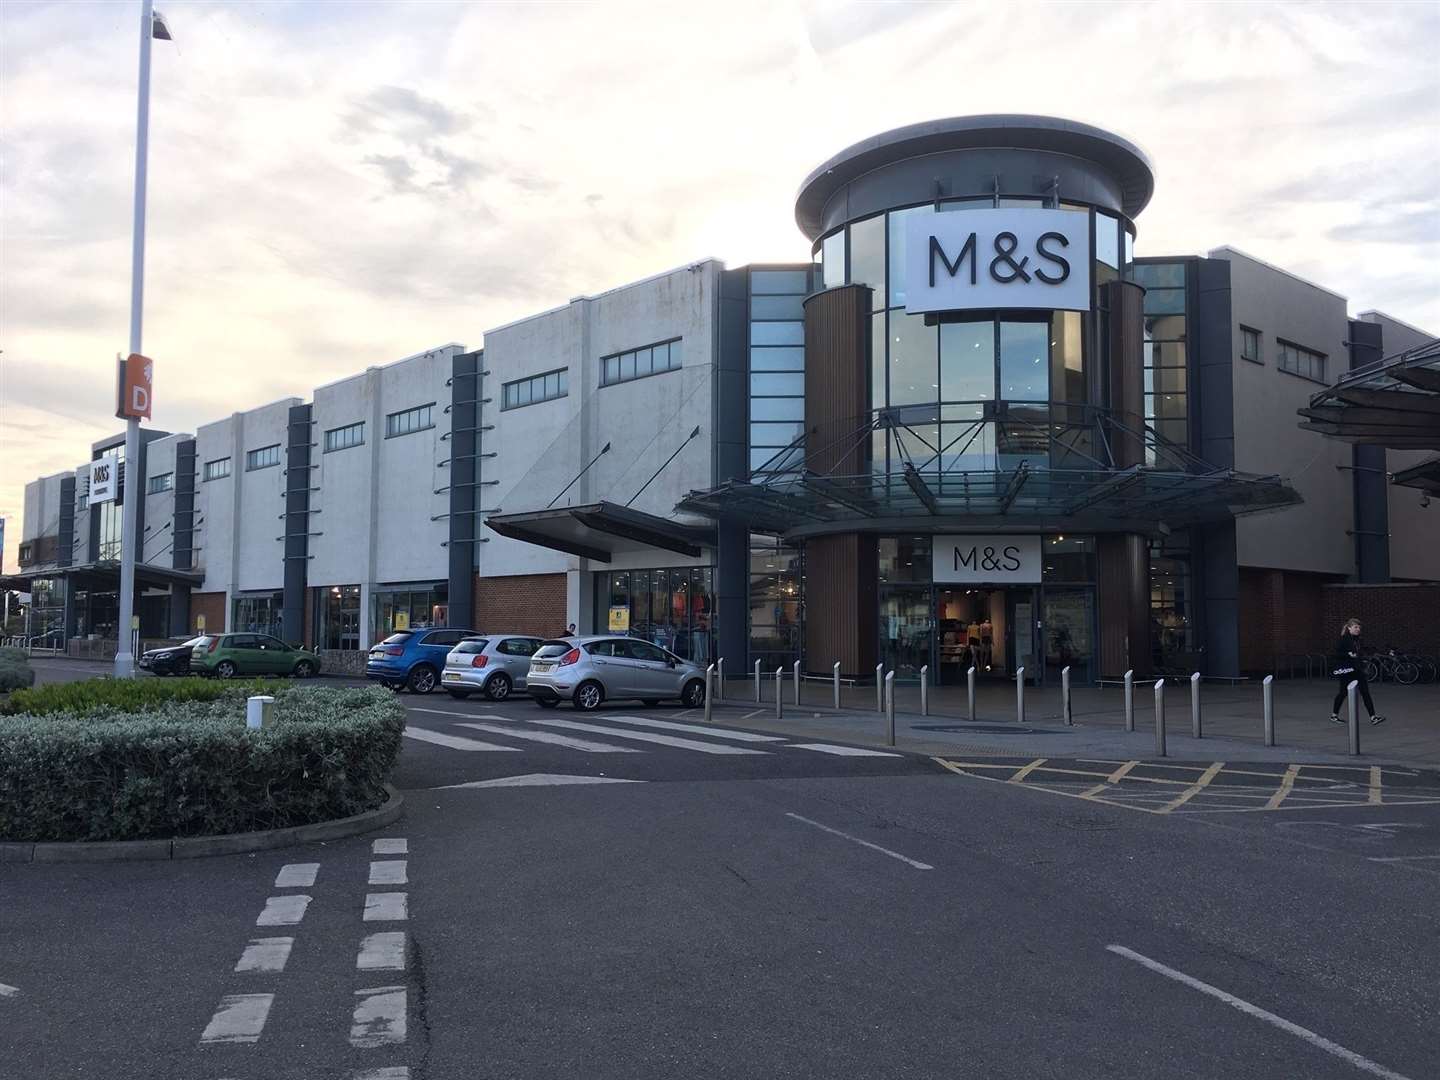 The M&S store at Westwood Cross in Thanet